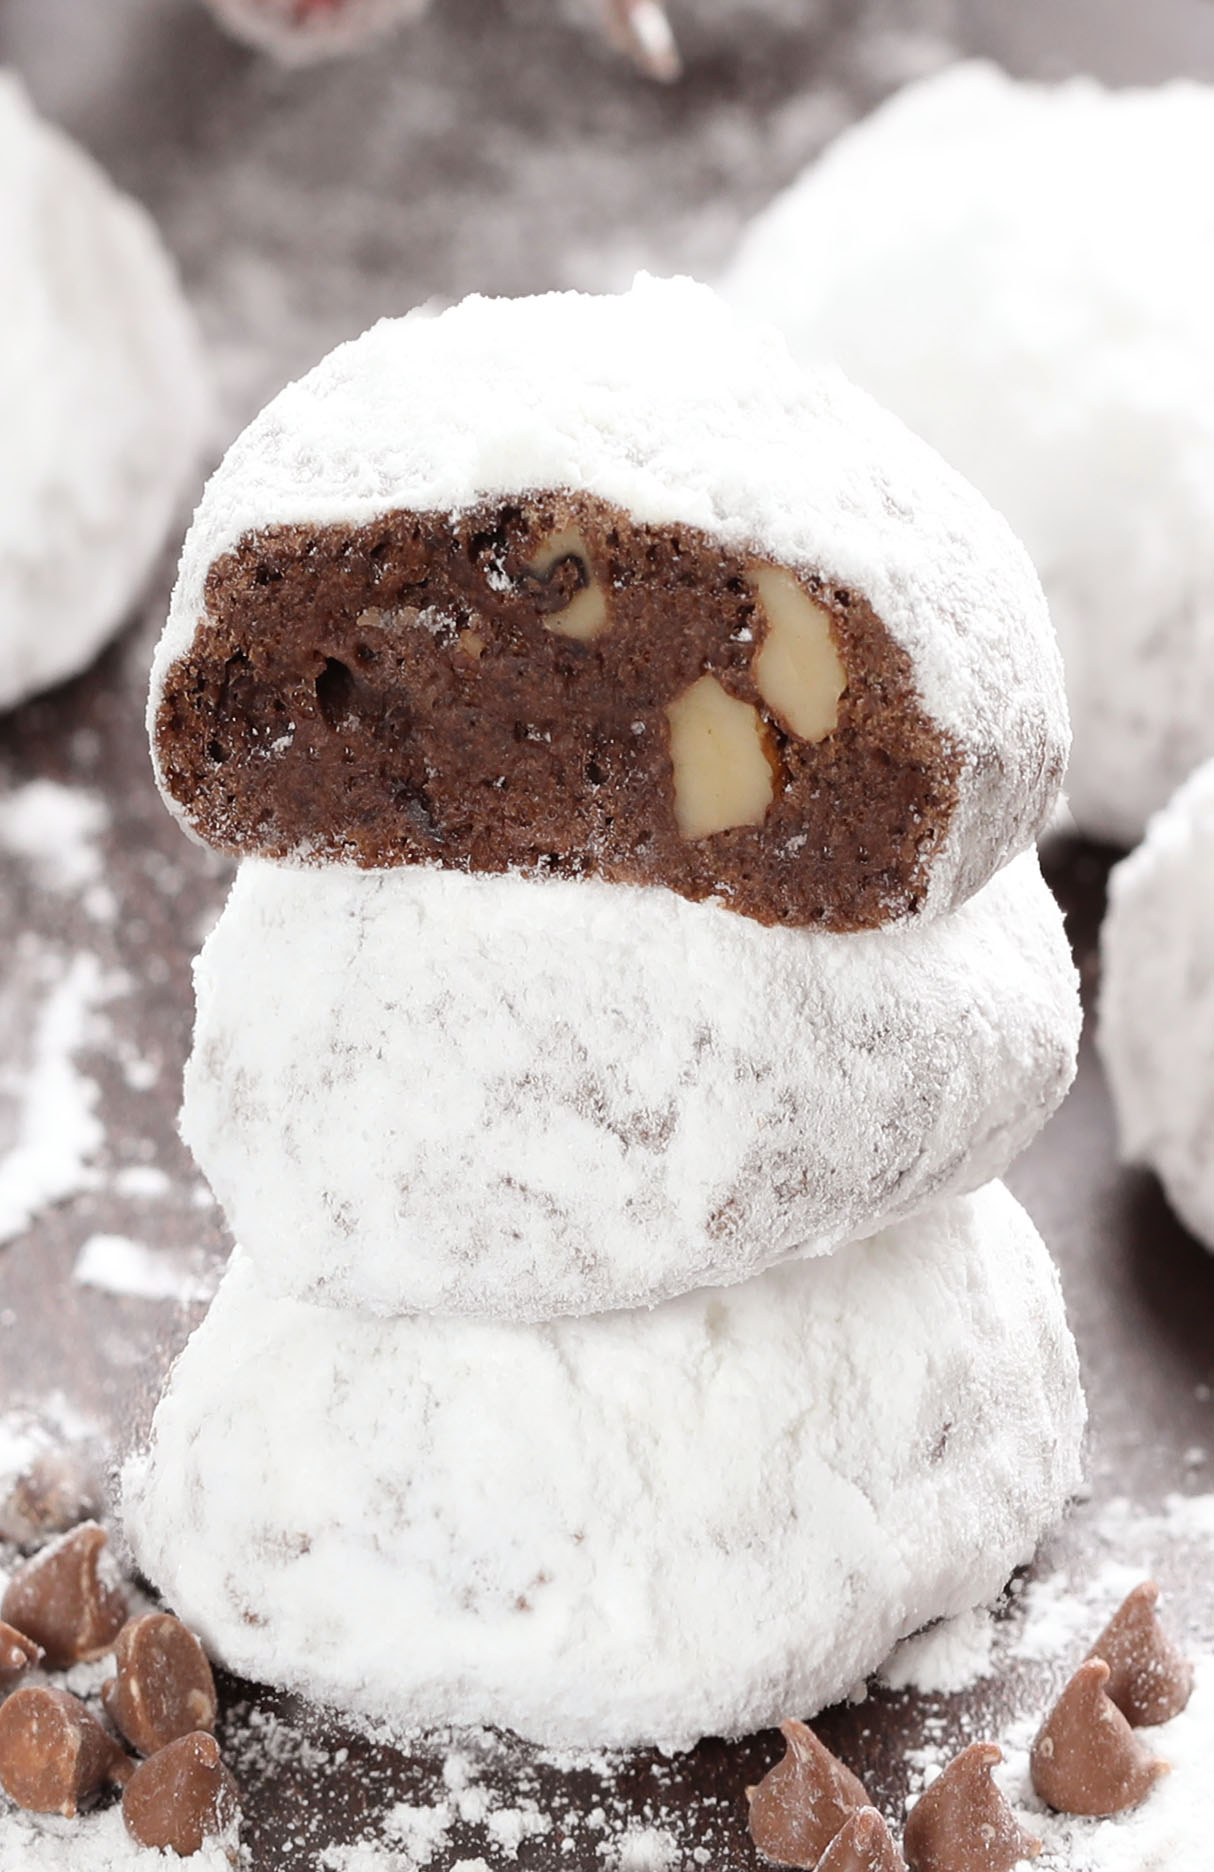 For all Christmas Chocolate lovers, these rich, melt-in-your-mouth Double Chocolate Snowball Cookies are absolutely the recipe to try!